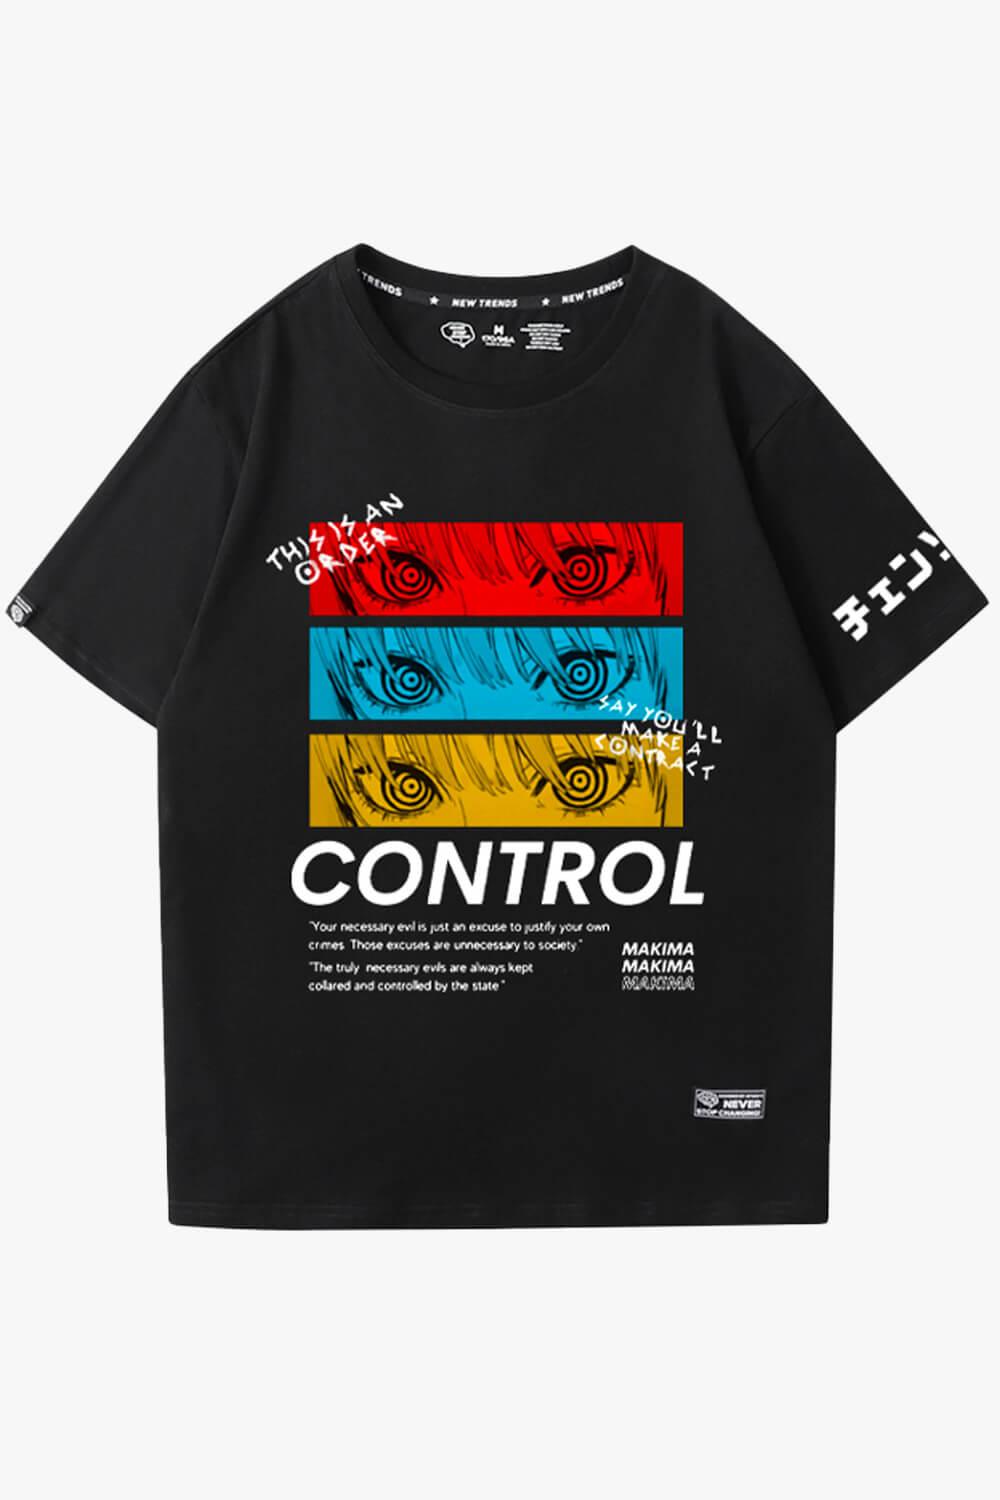 Chainsaw Man Makima Eyes Control T-Shirt - Aesthetic Clothes Shop